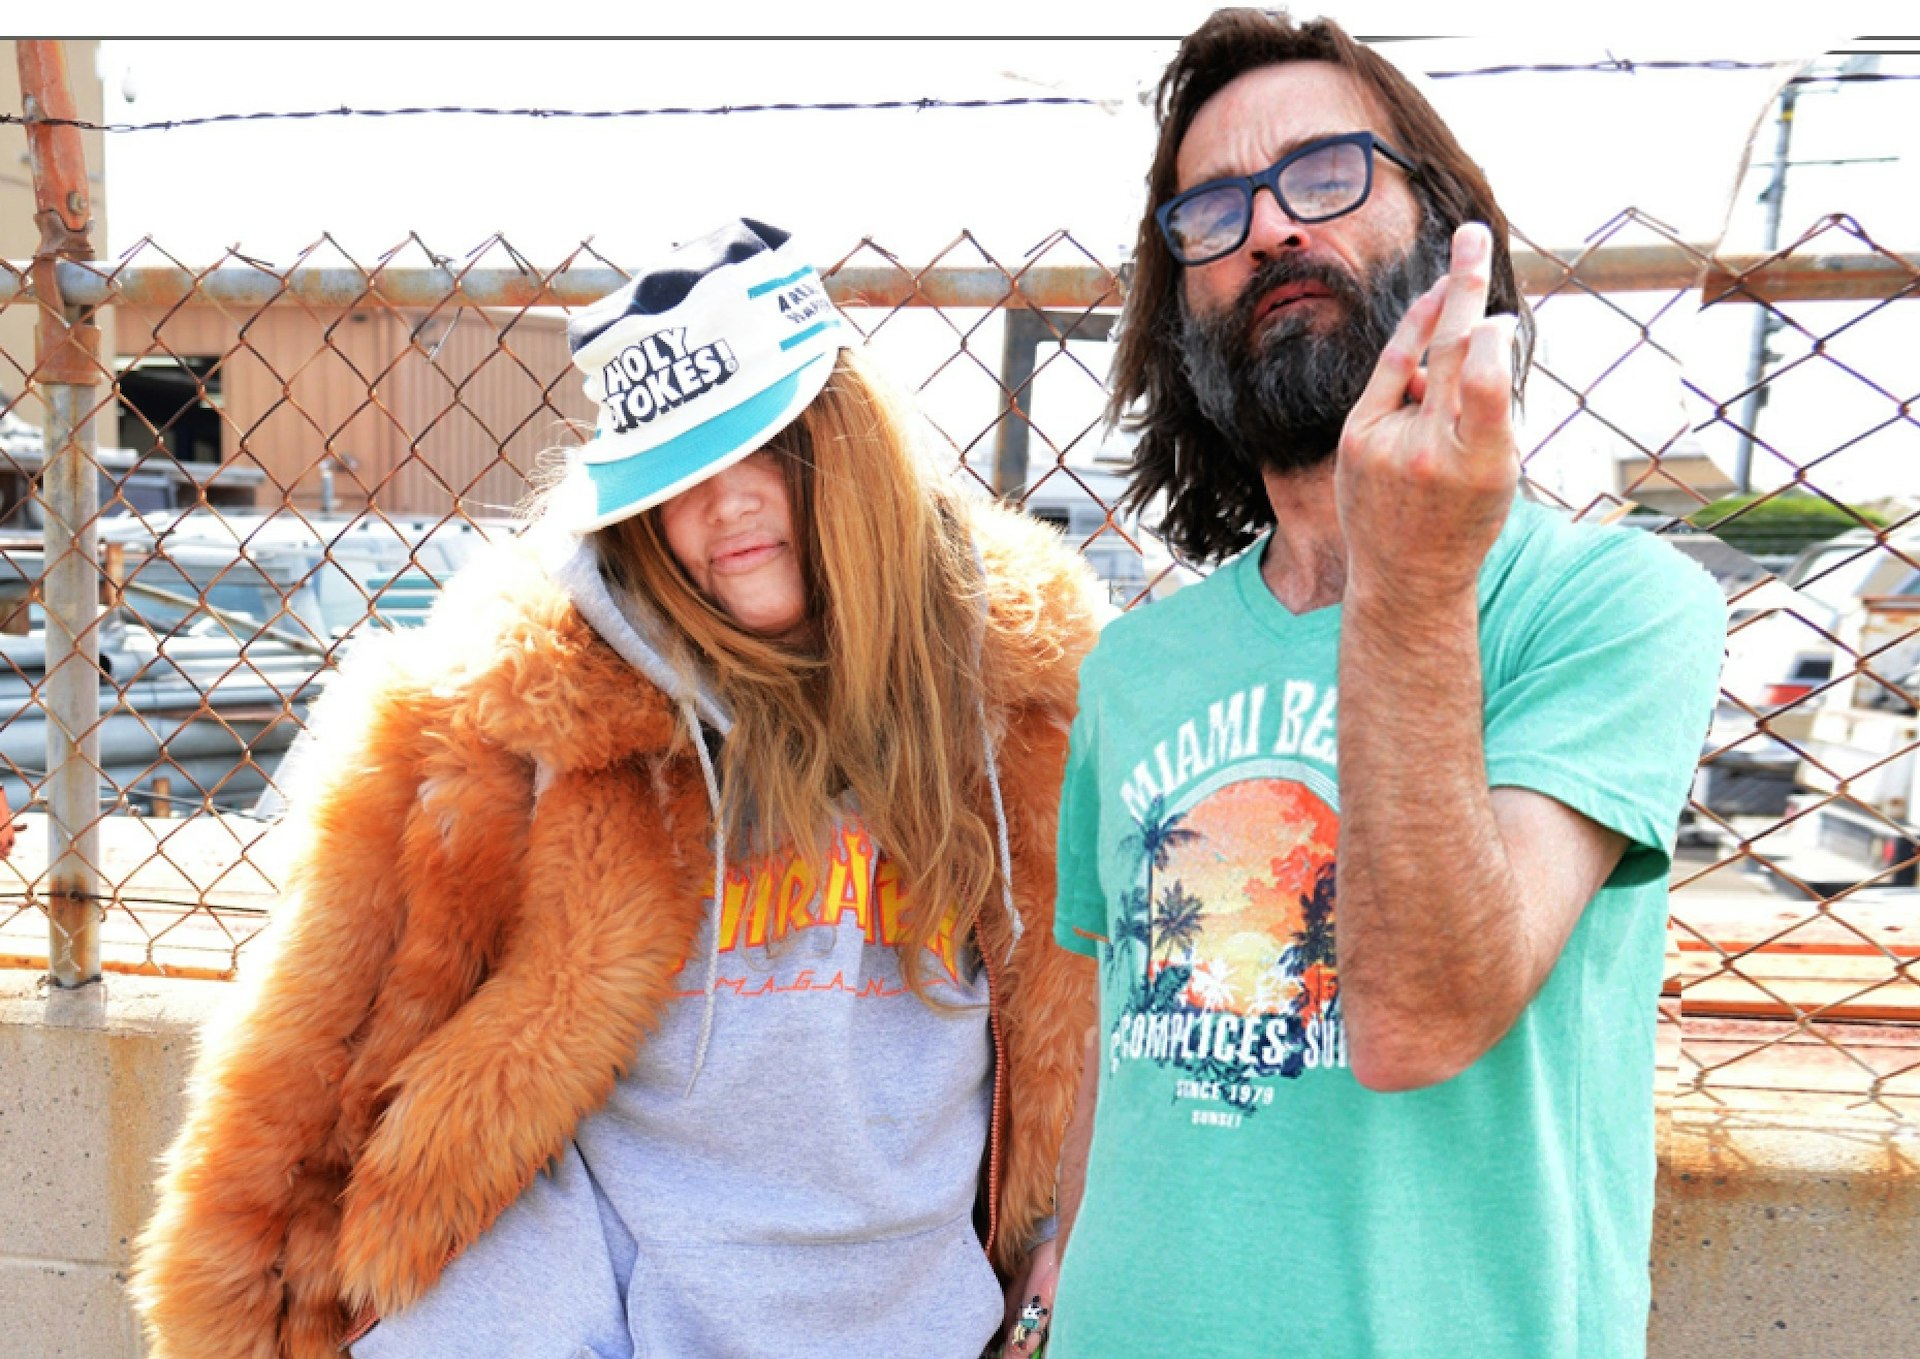 The return of Royal Trux, music’s most destructive duo